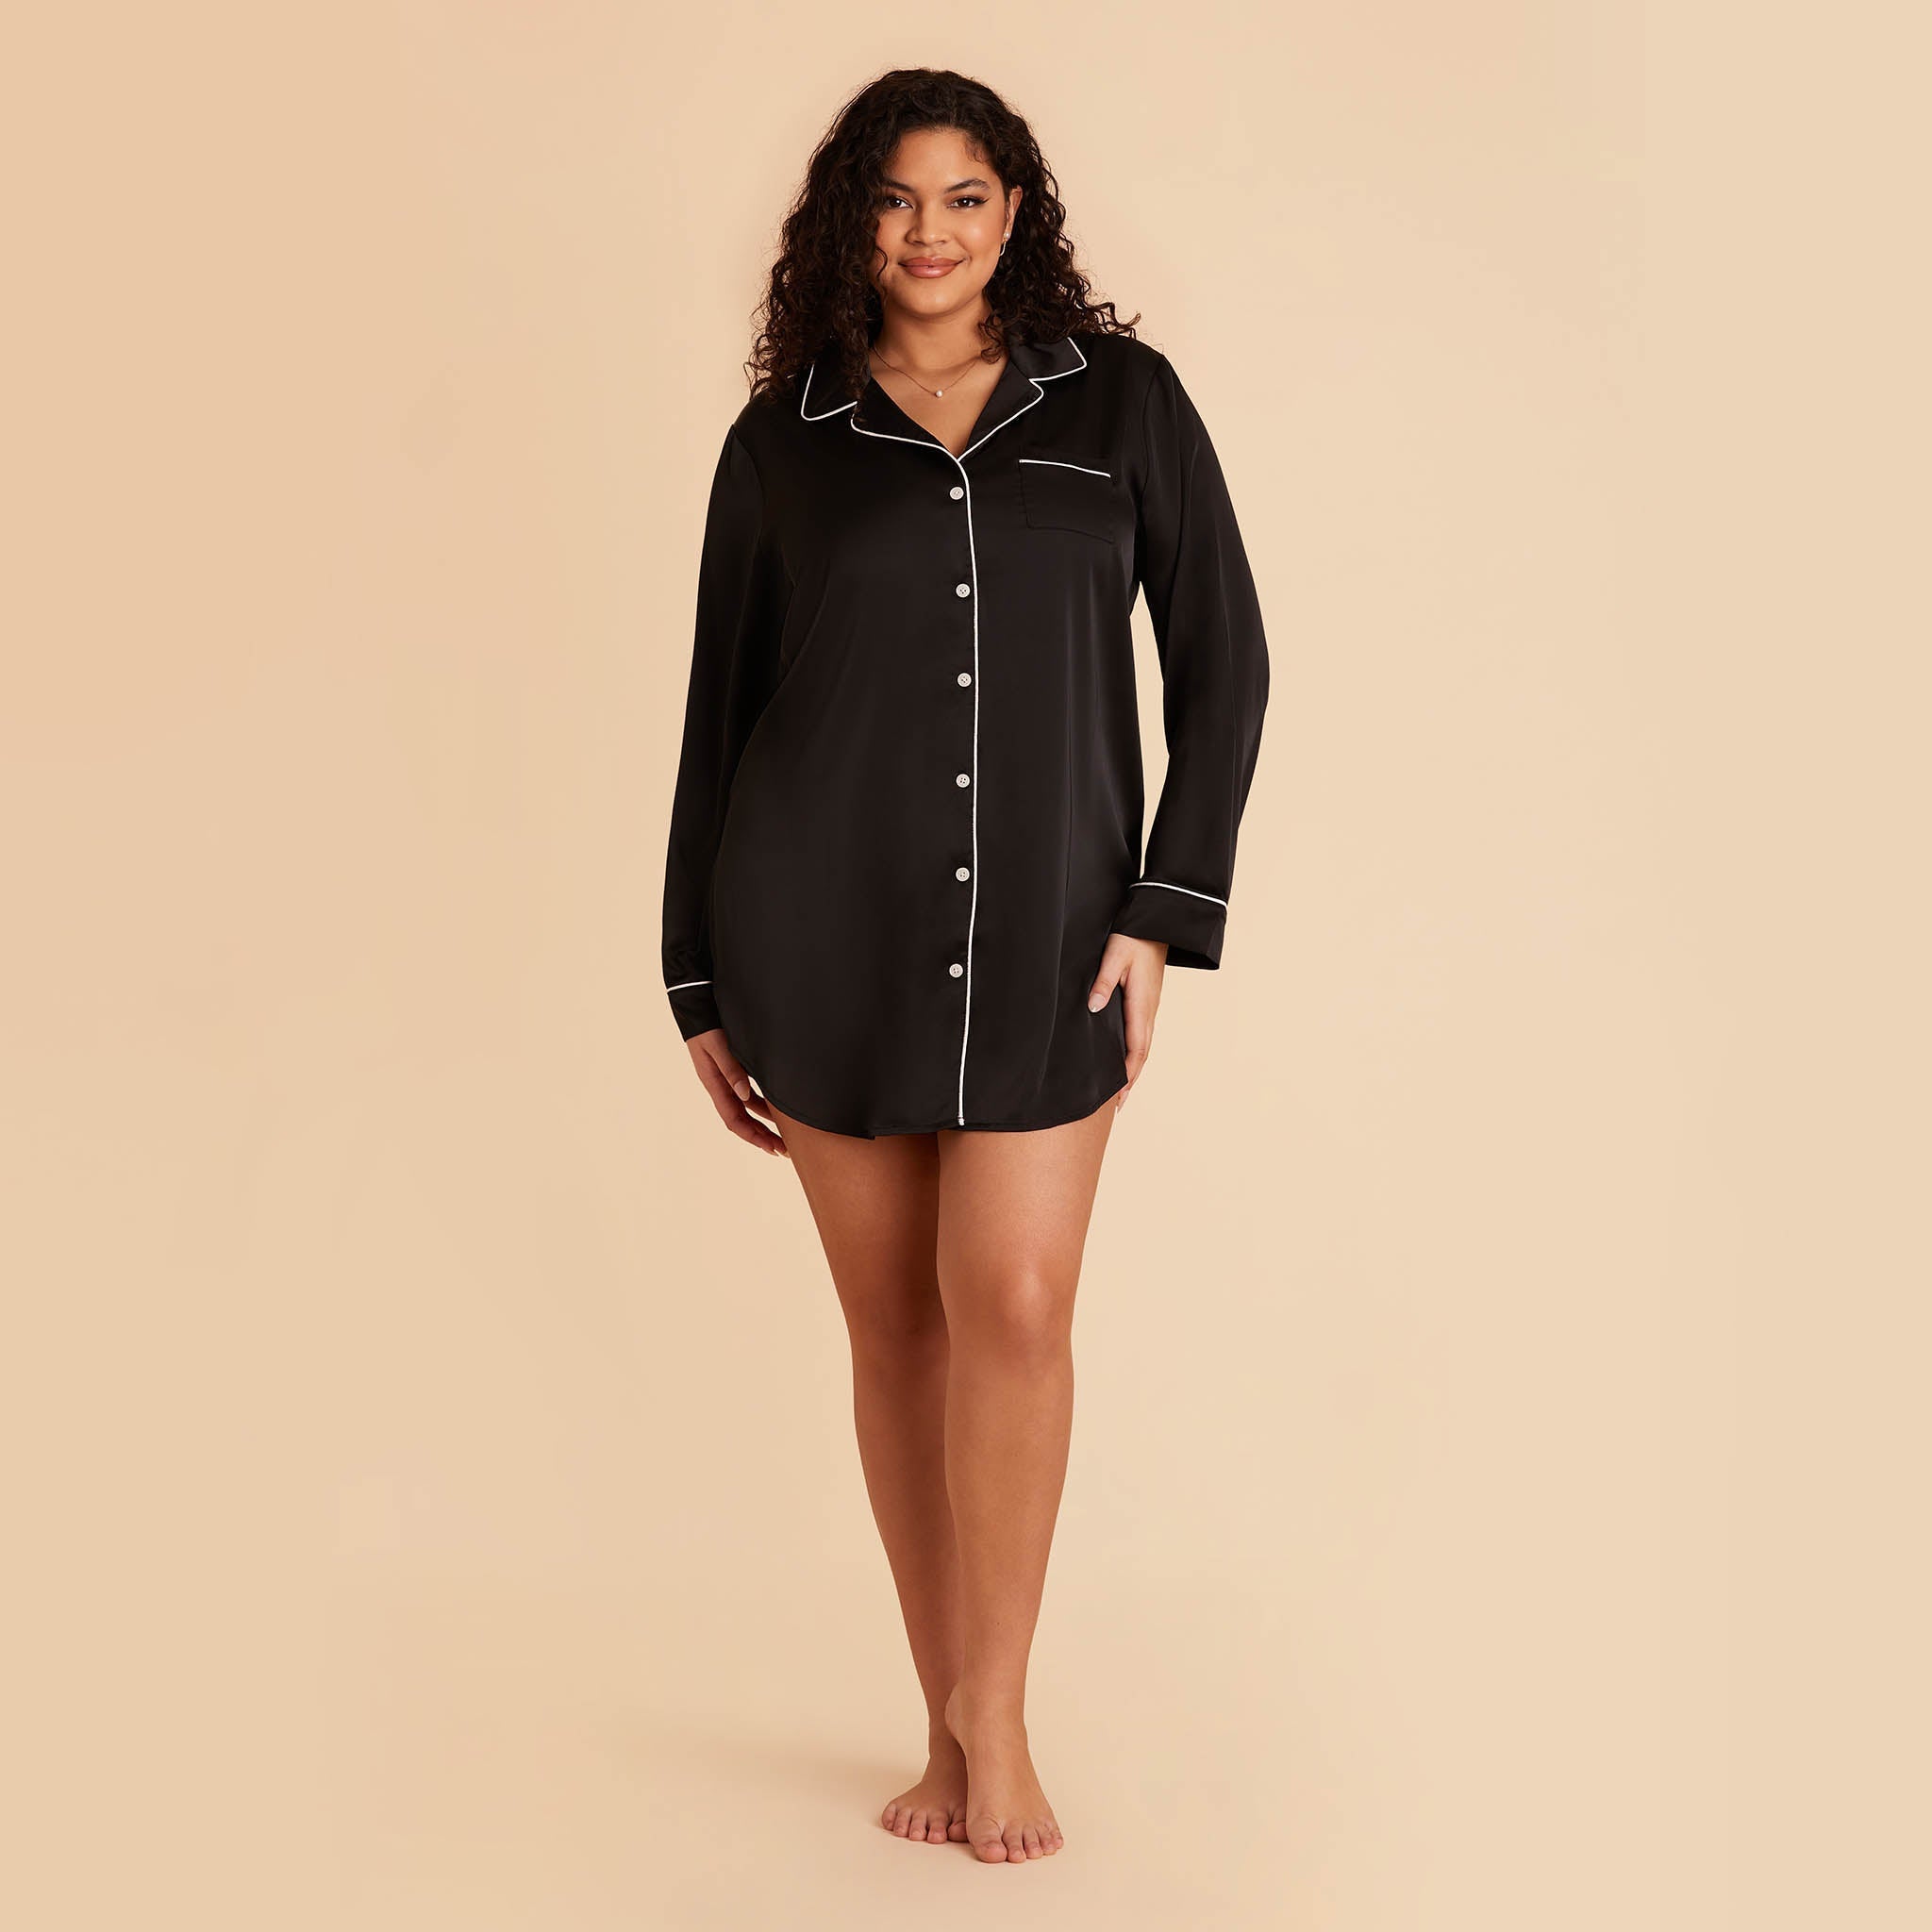 Plus Size Satin Sleepshirt in black by Birdy Grey, front view